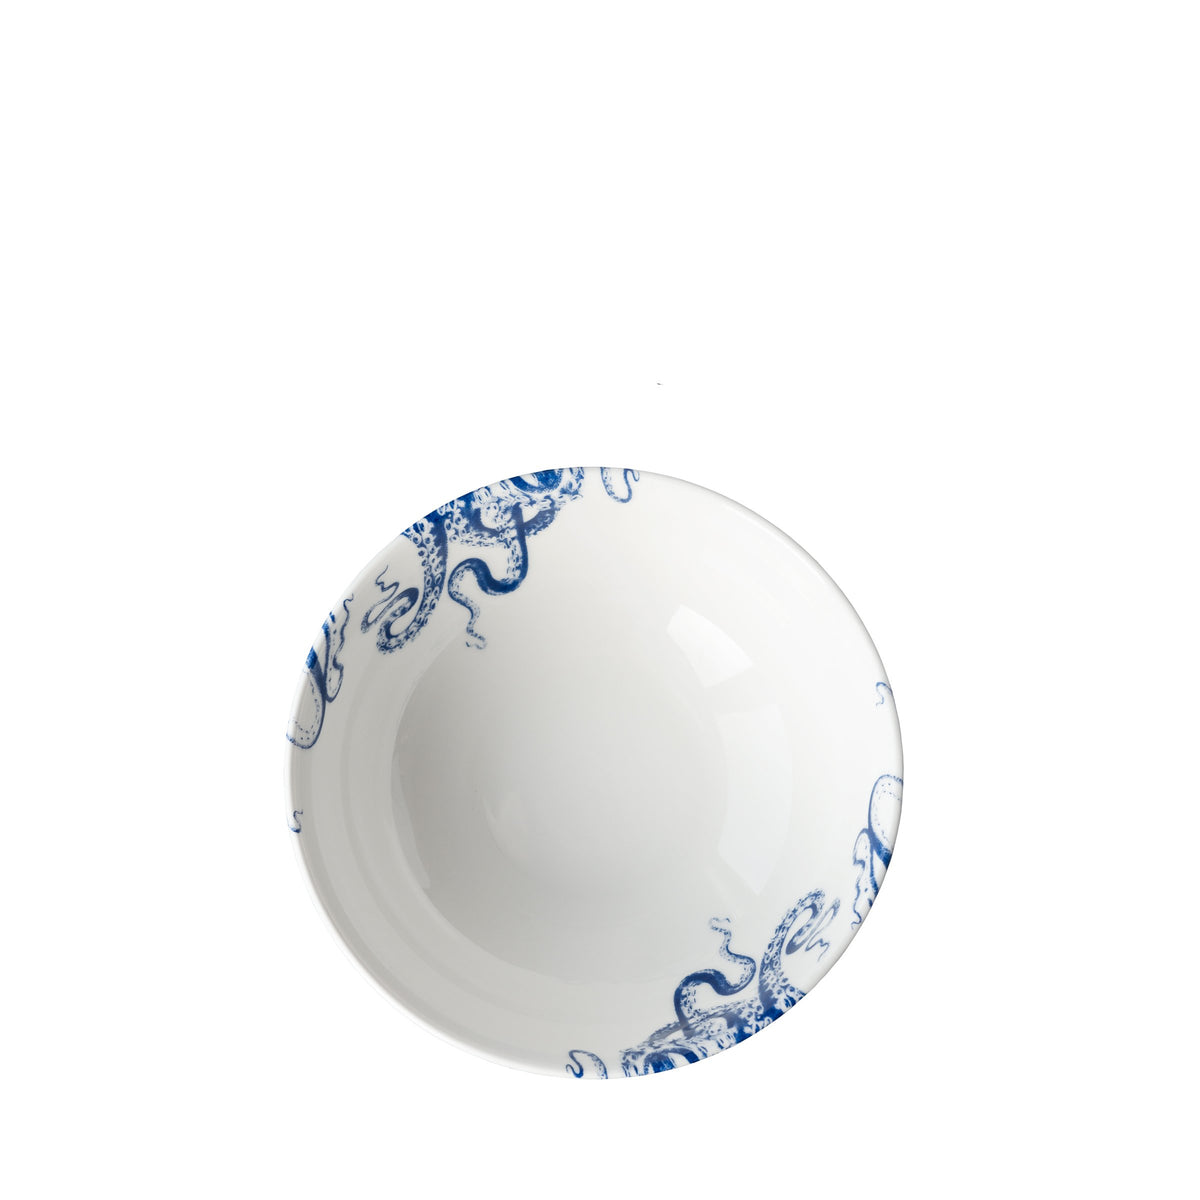 A premium porcelain cereal bowl featuring delightful blue illustrations of Lucy the octopus around the inner rim is called the Lucy Cereal Bowl by Caskata.